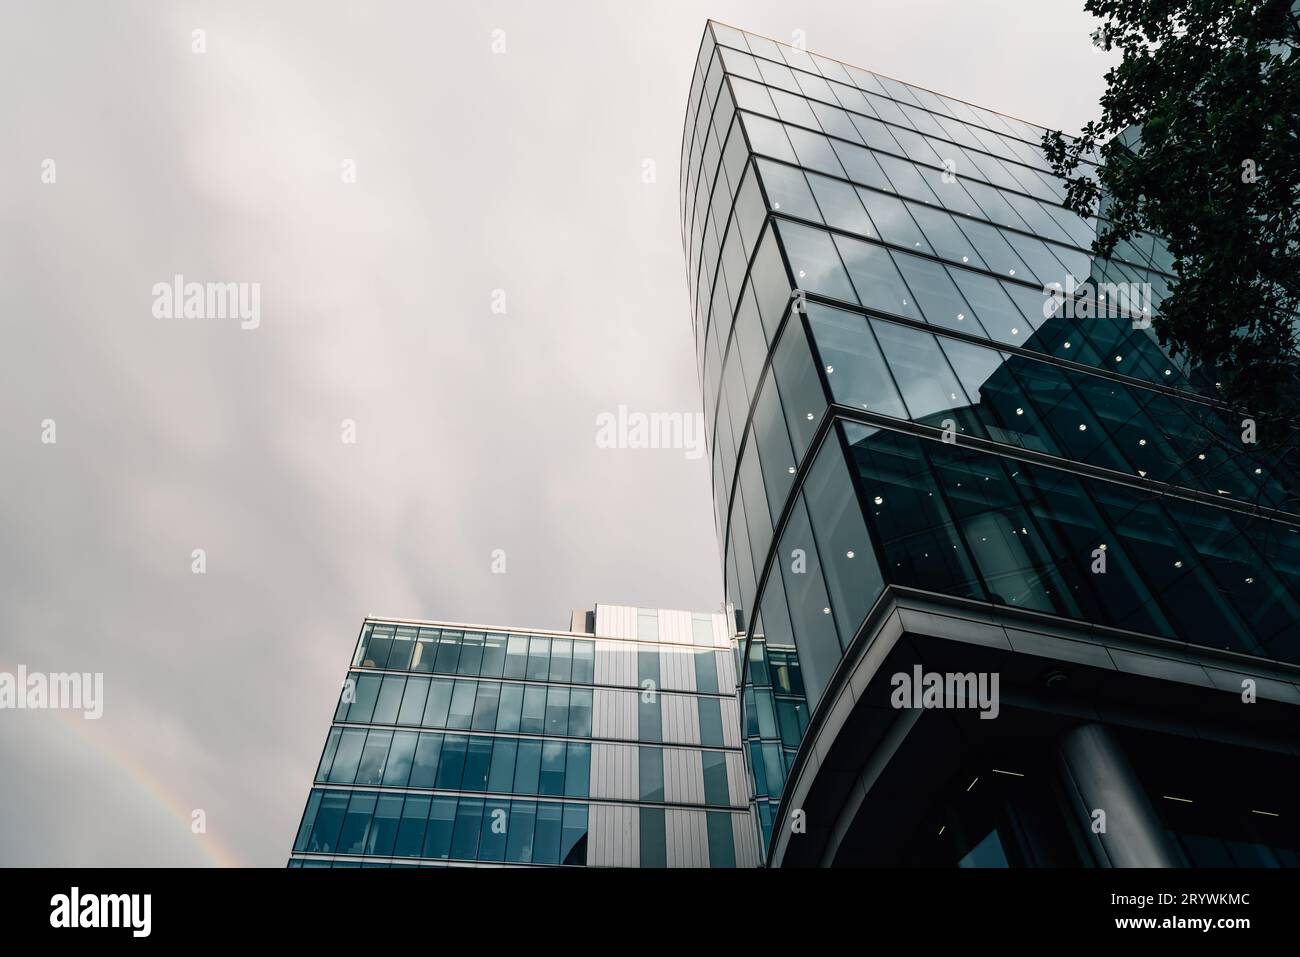 London, UK - August 26, 2023: Office building in the Queens Walk by the City Hall. Low angle view of the glass facade against cloudy sky Stock Photo